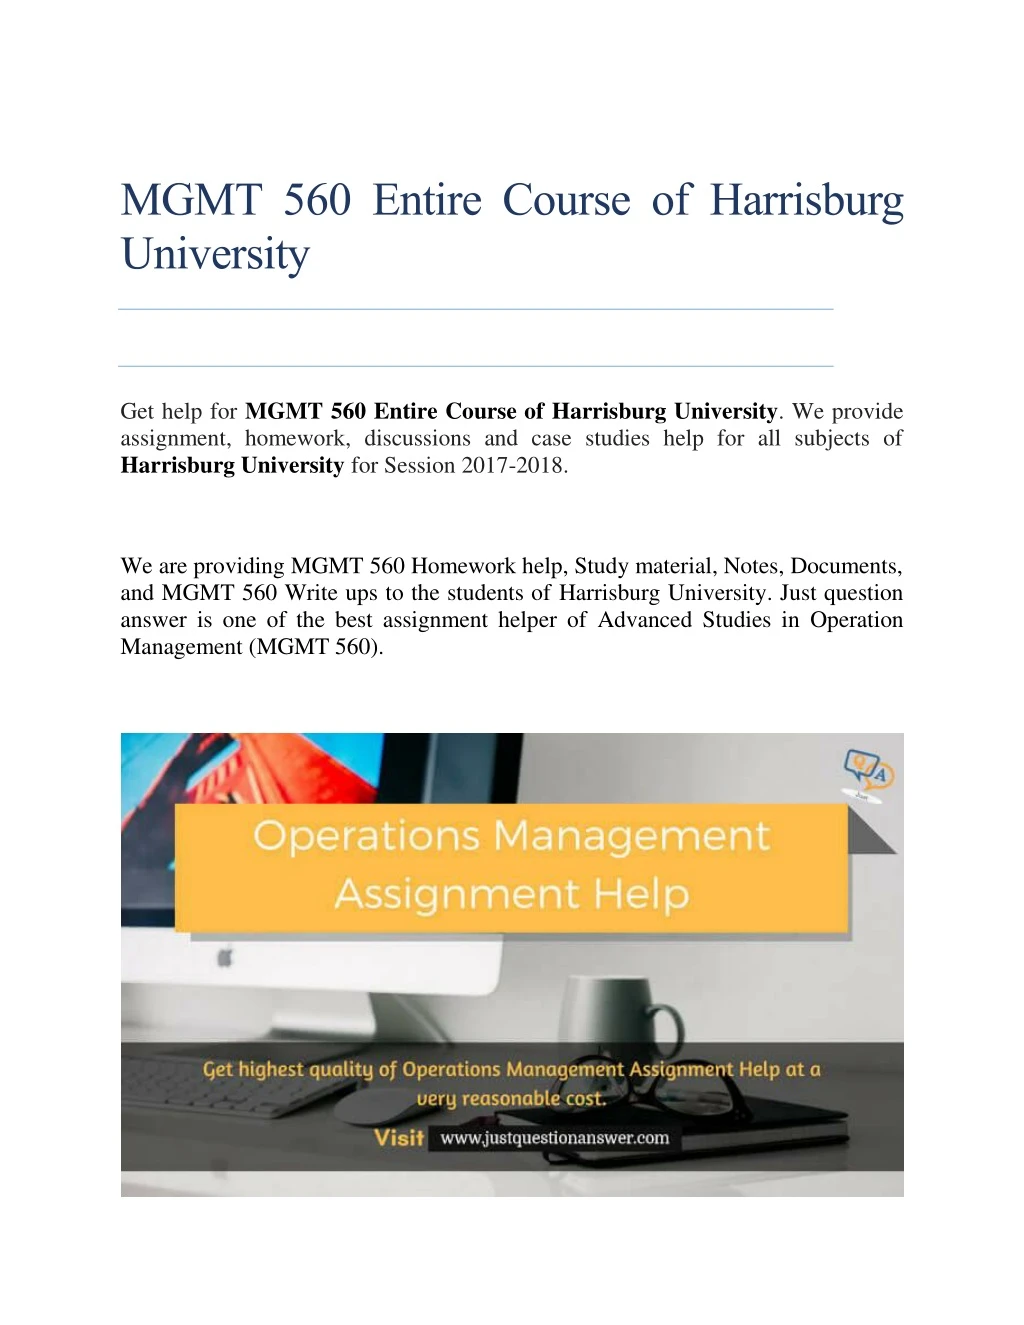 mgmt 560 entire course of harrisburg university